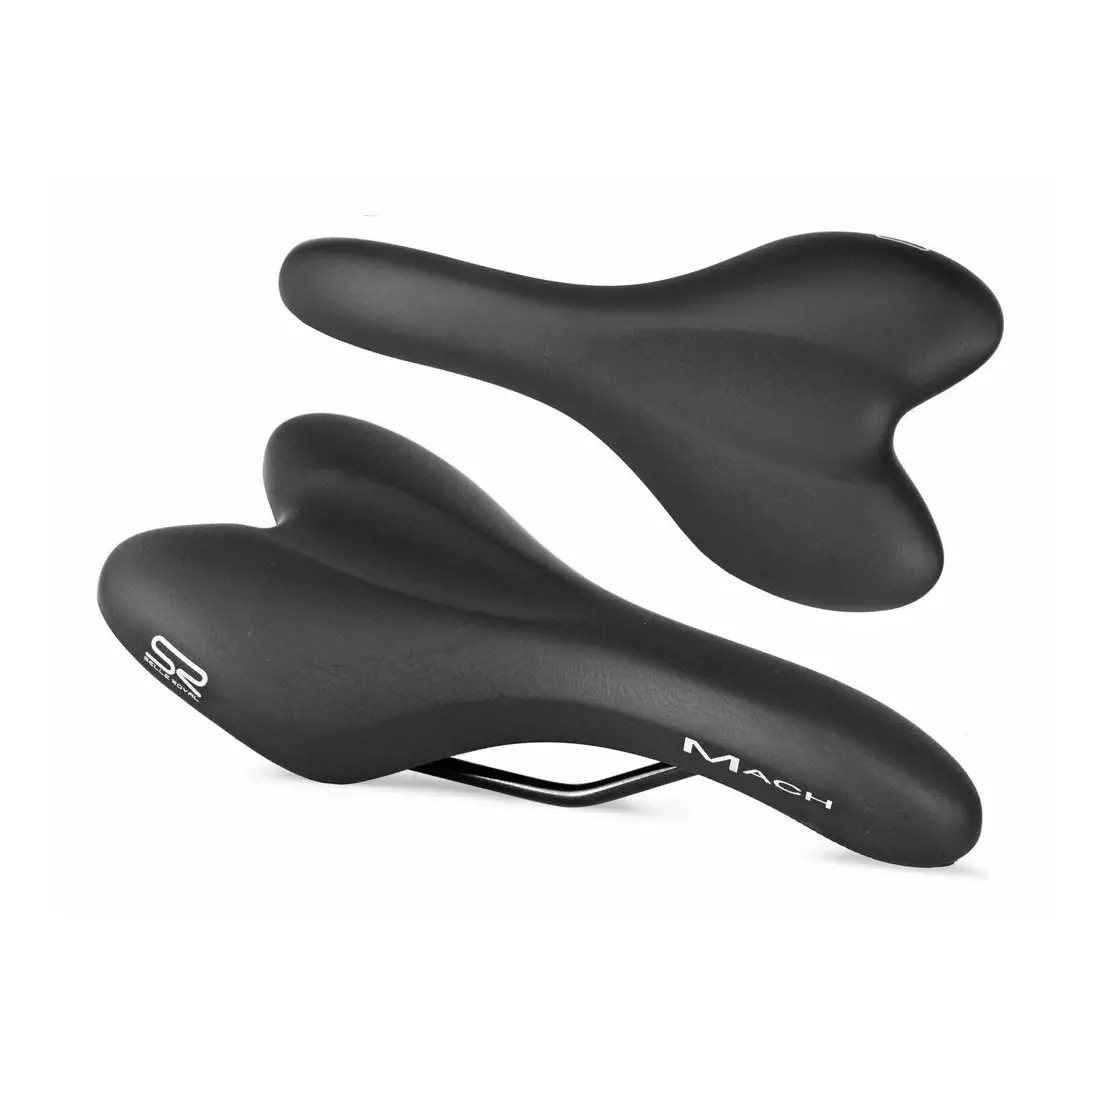 SELLEROYAL bicycle saddle classic athletic mach SR-8549E18067